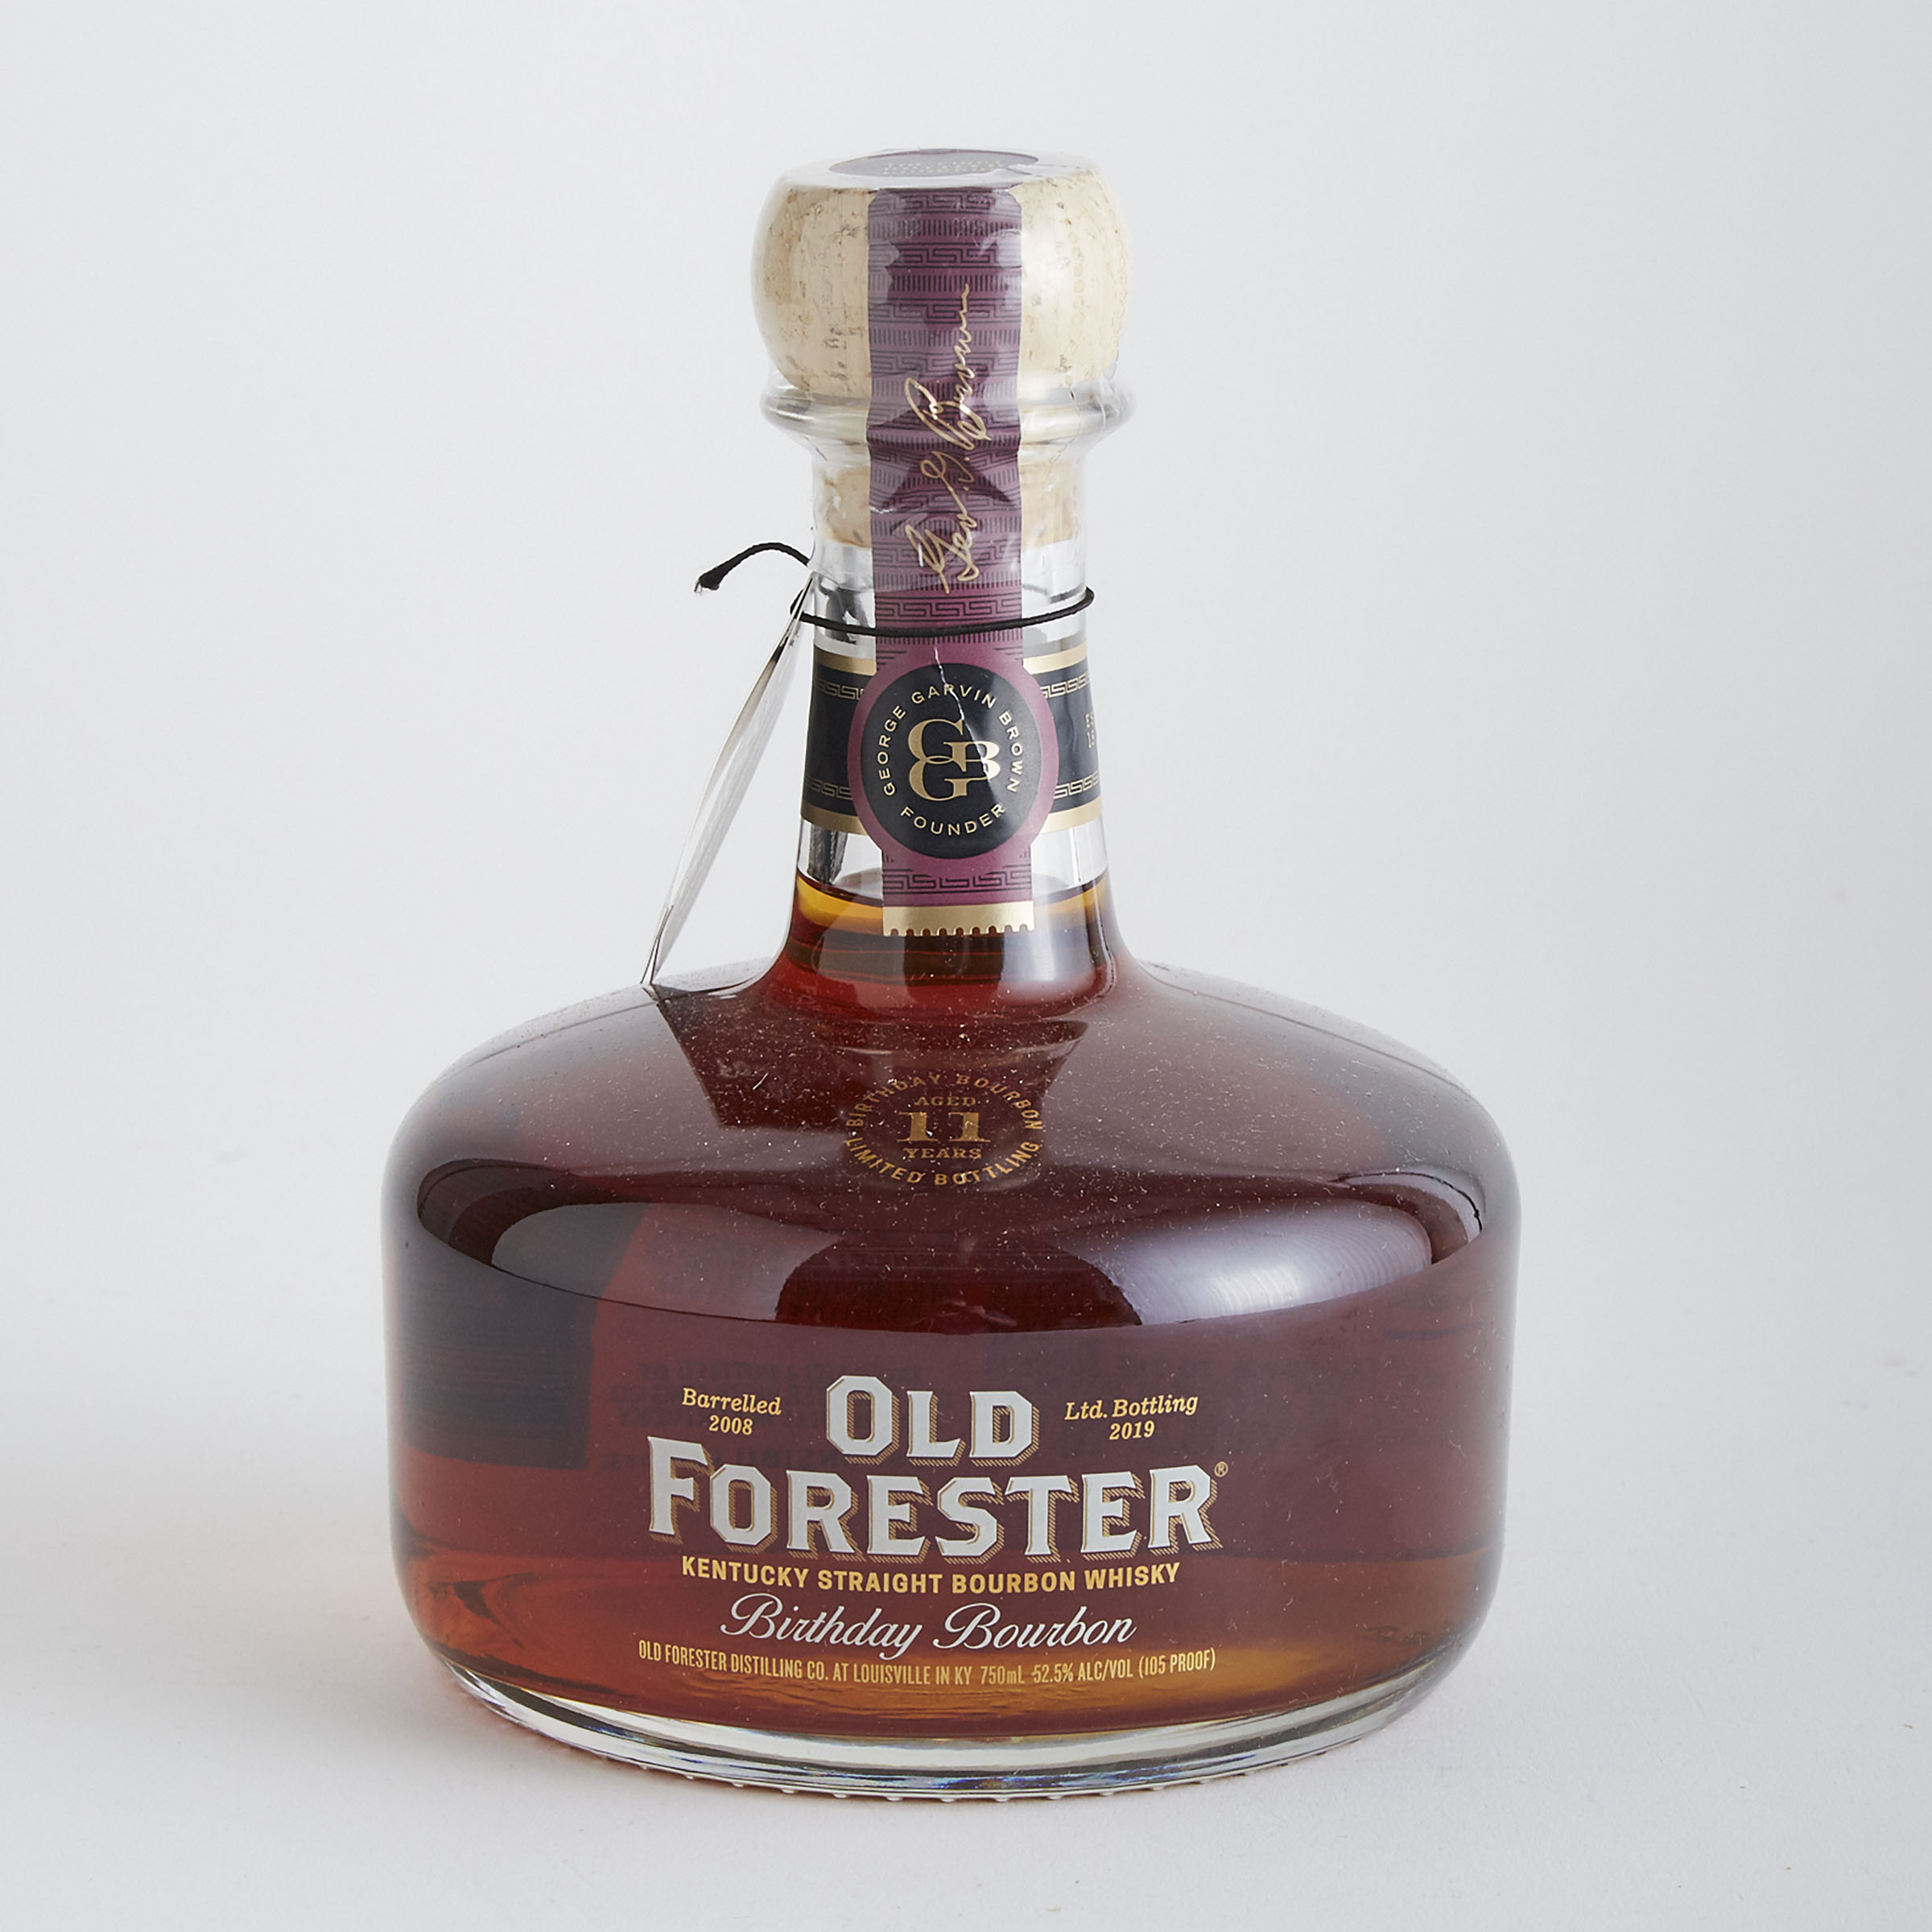 OLD FORESTER BIRTHDAY BOURBON KENTUCKY STRAIGHT BOURBON WHISKY 11 YEARS (ONE 750 ML)